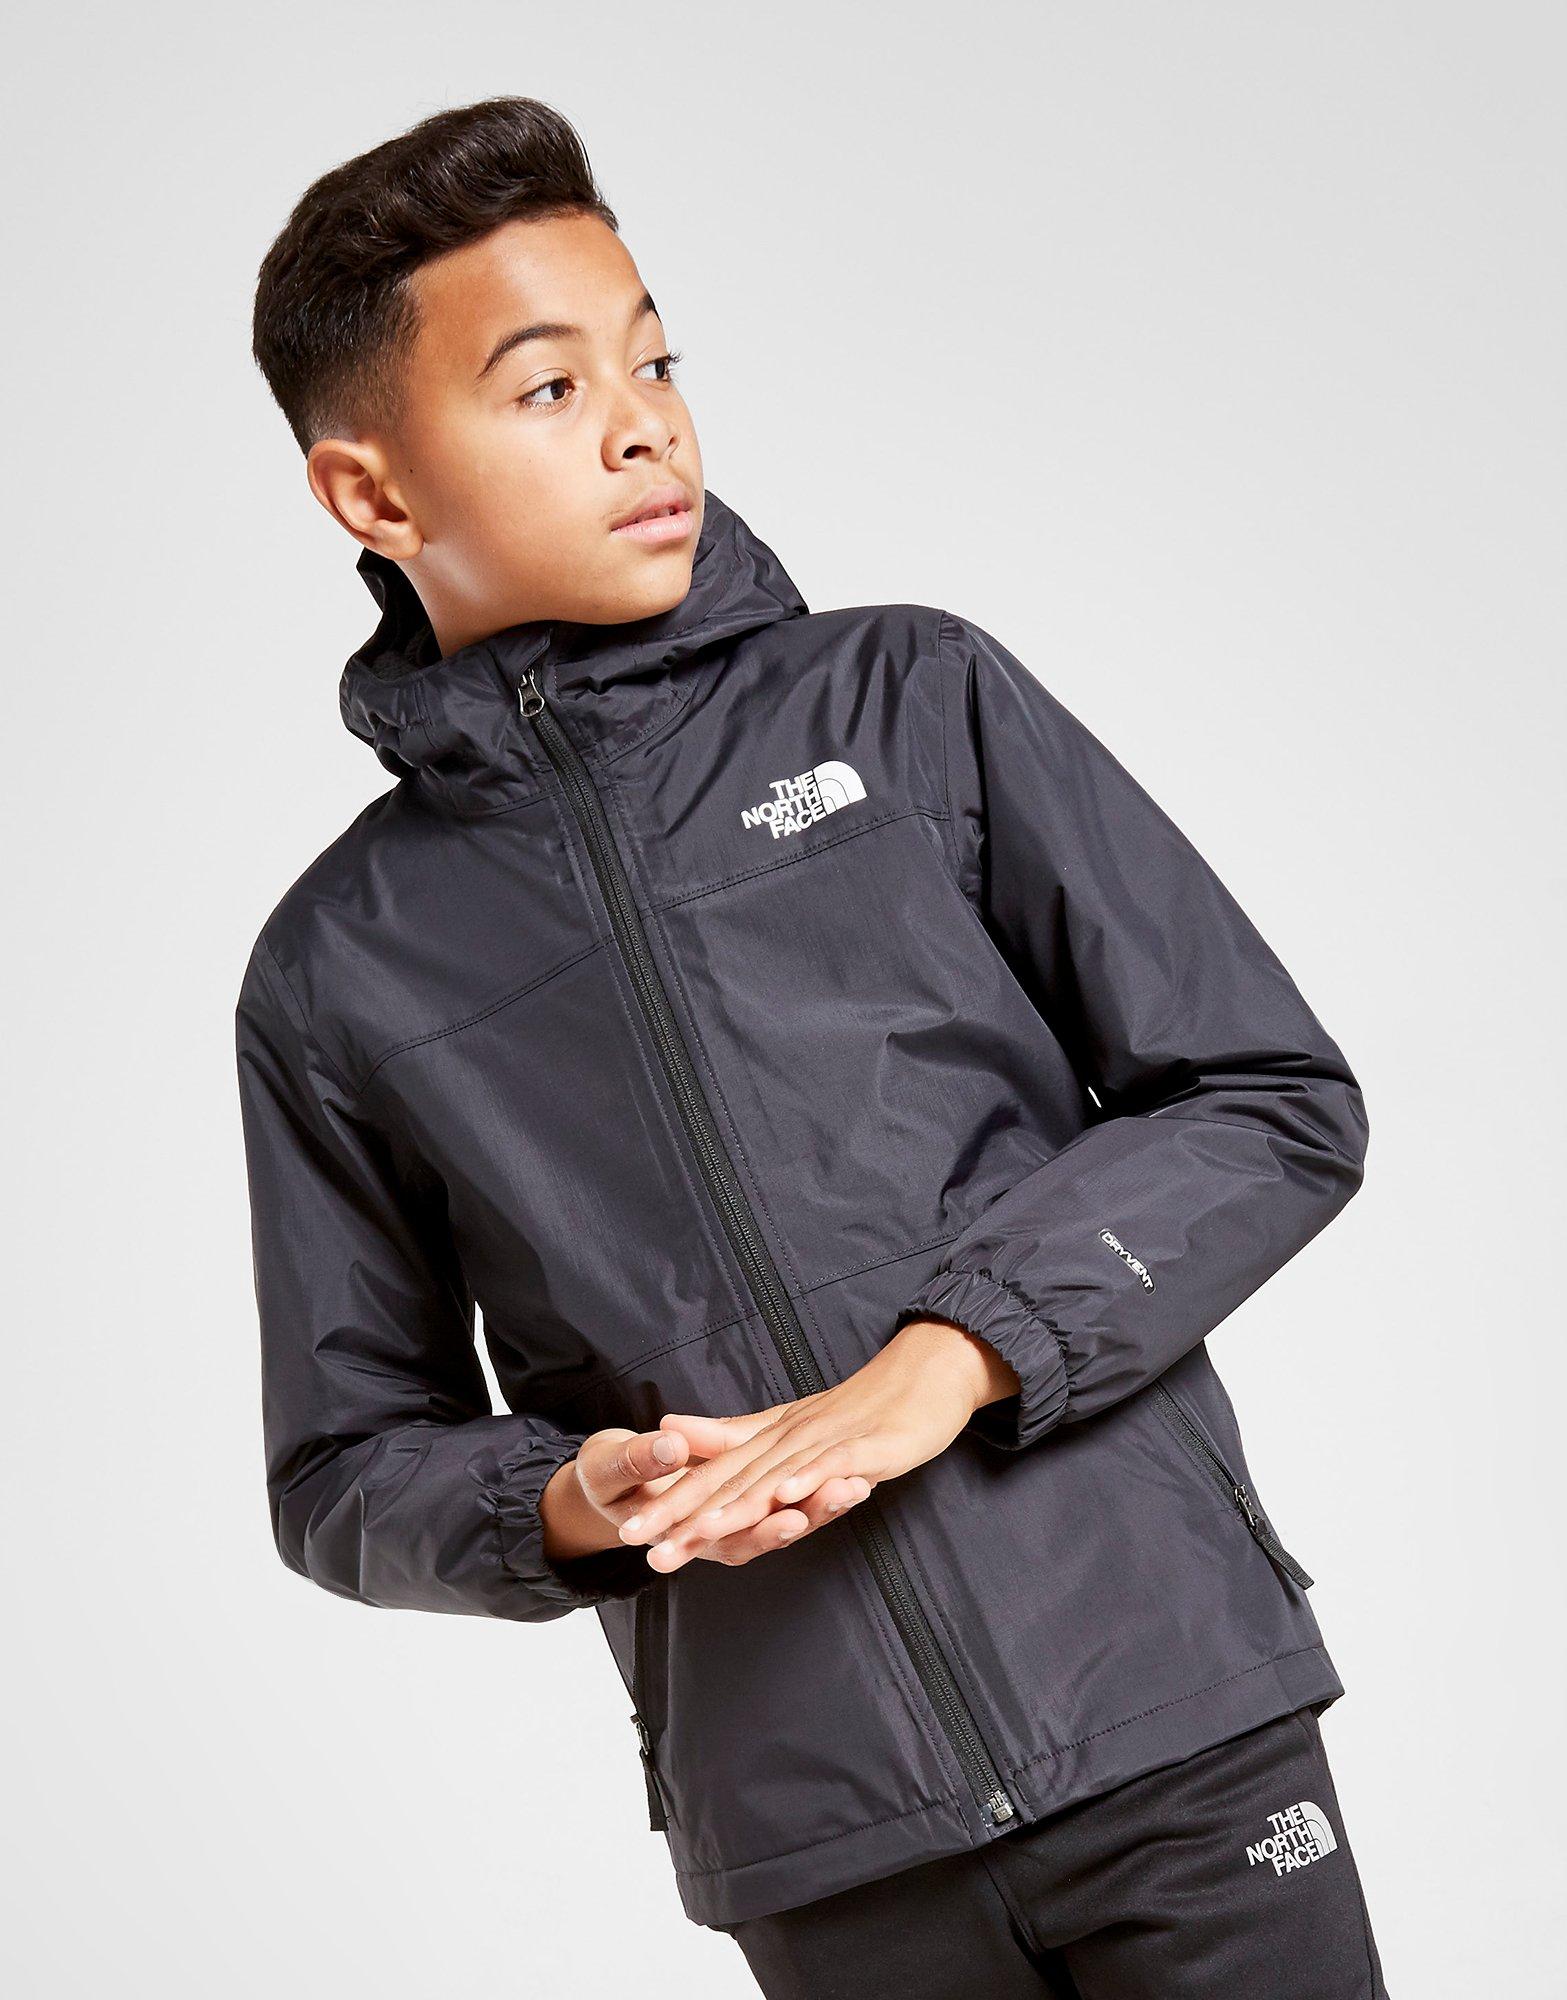 the north face warm storm